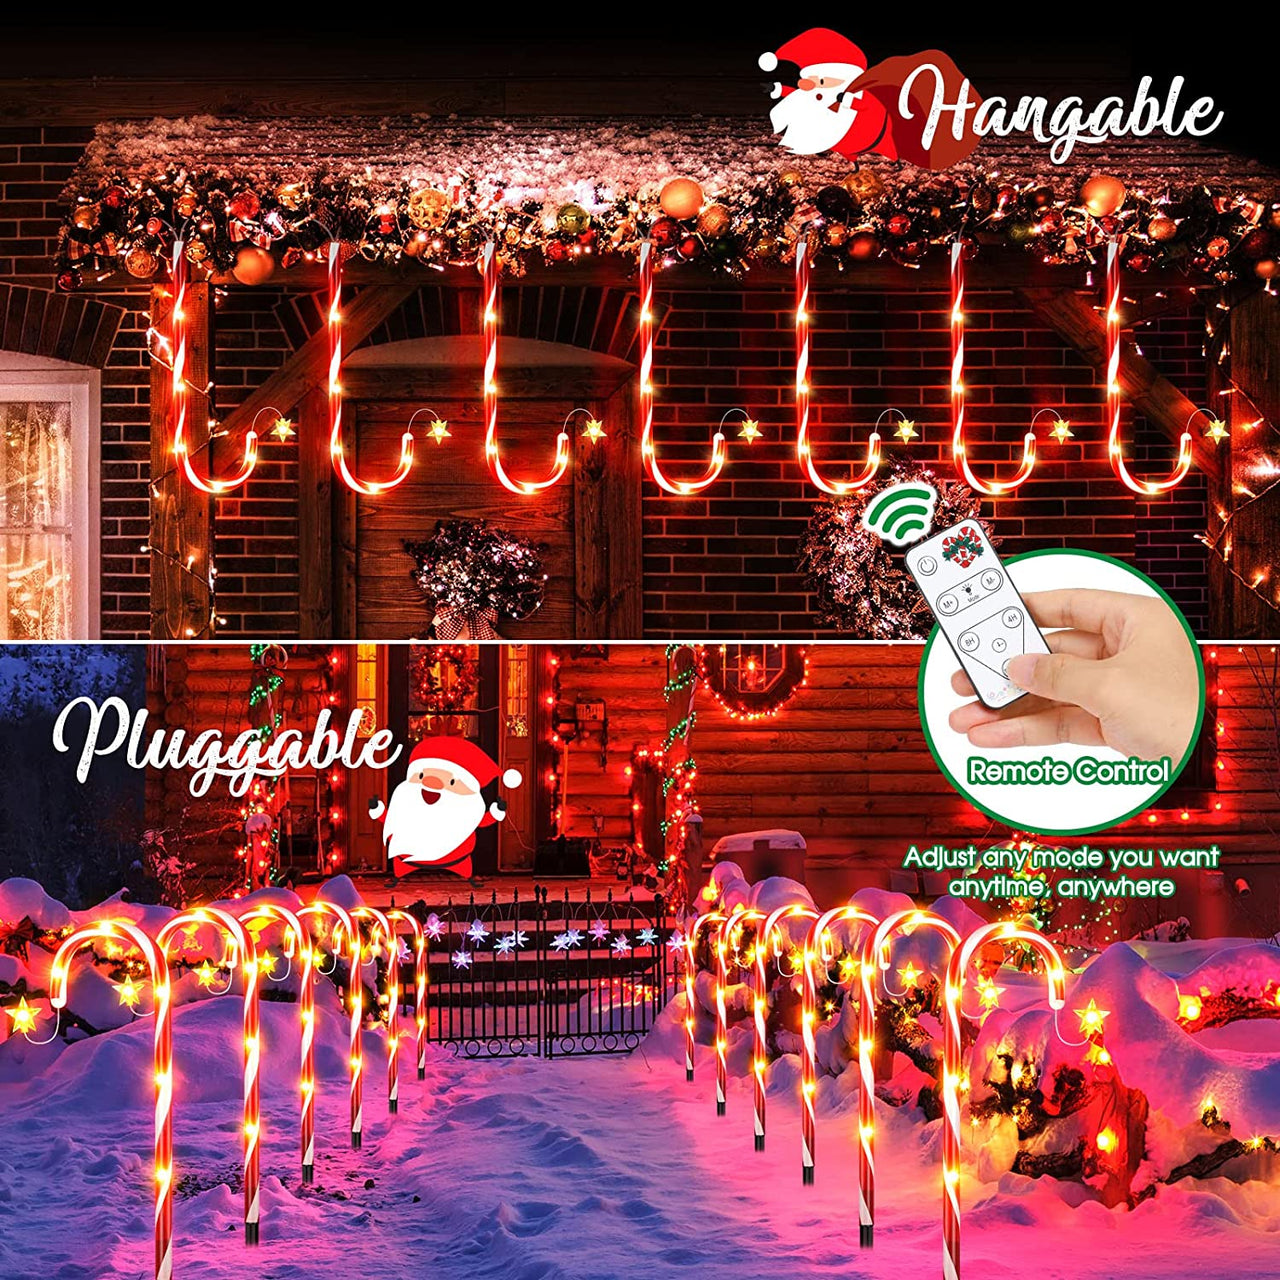 12 Pack Outdoor Christmas Decorations Solar Candy Cane Lights, LETMY Brighter & Taller Solar Christmas Pathway Lights with Remote Control, 9 Modes Christmas Decorations for Outdoor Yard Xmas Holiday